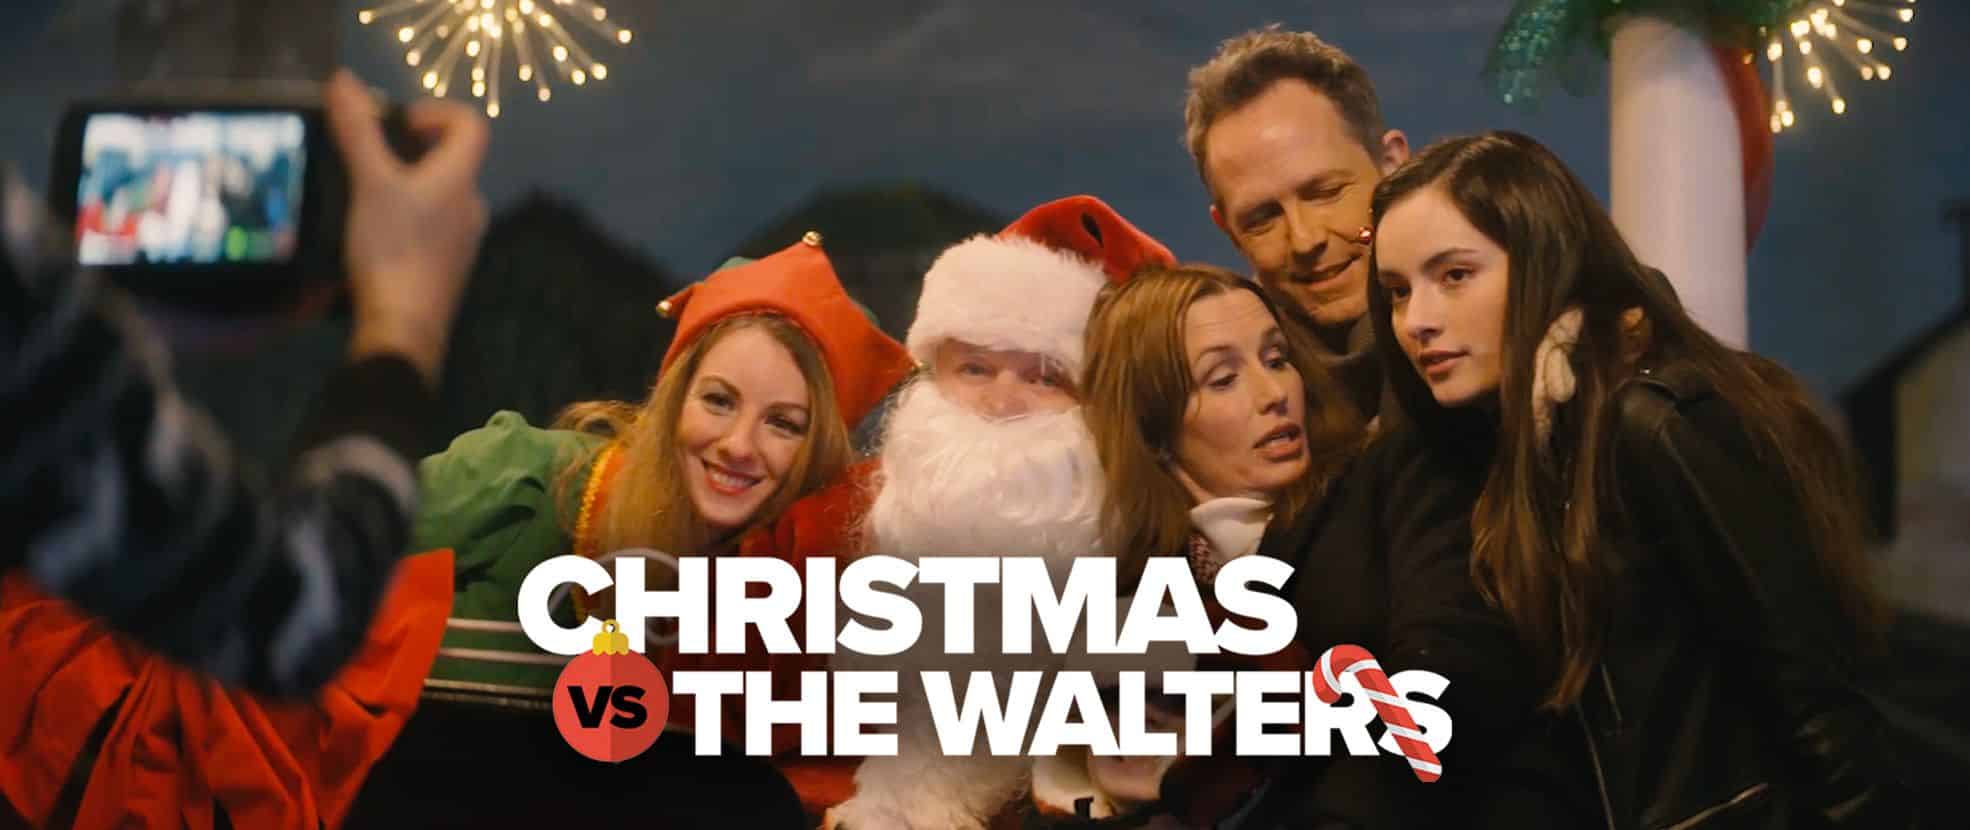 Christmas vs. The Walters: The Cast Speaks